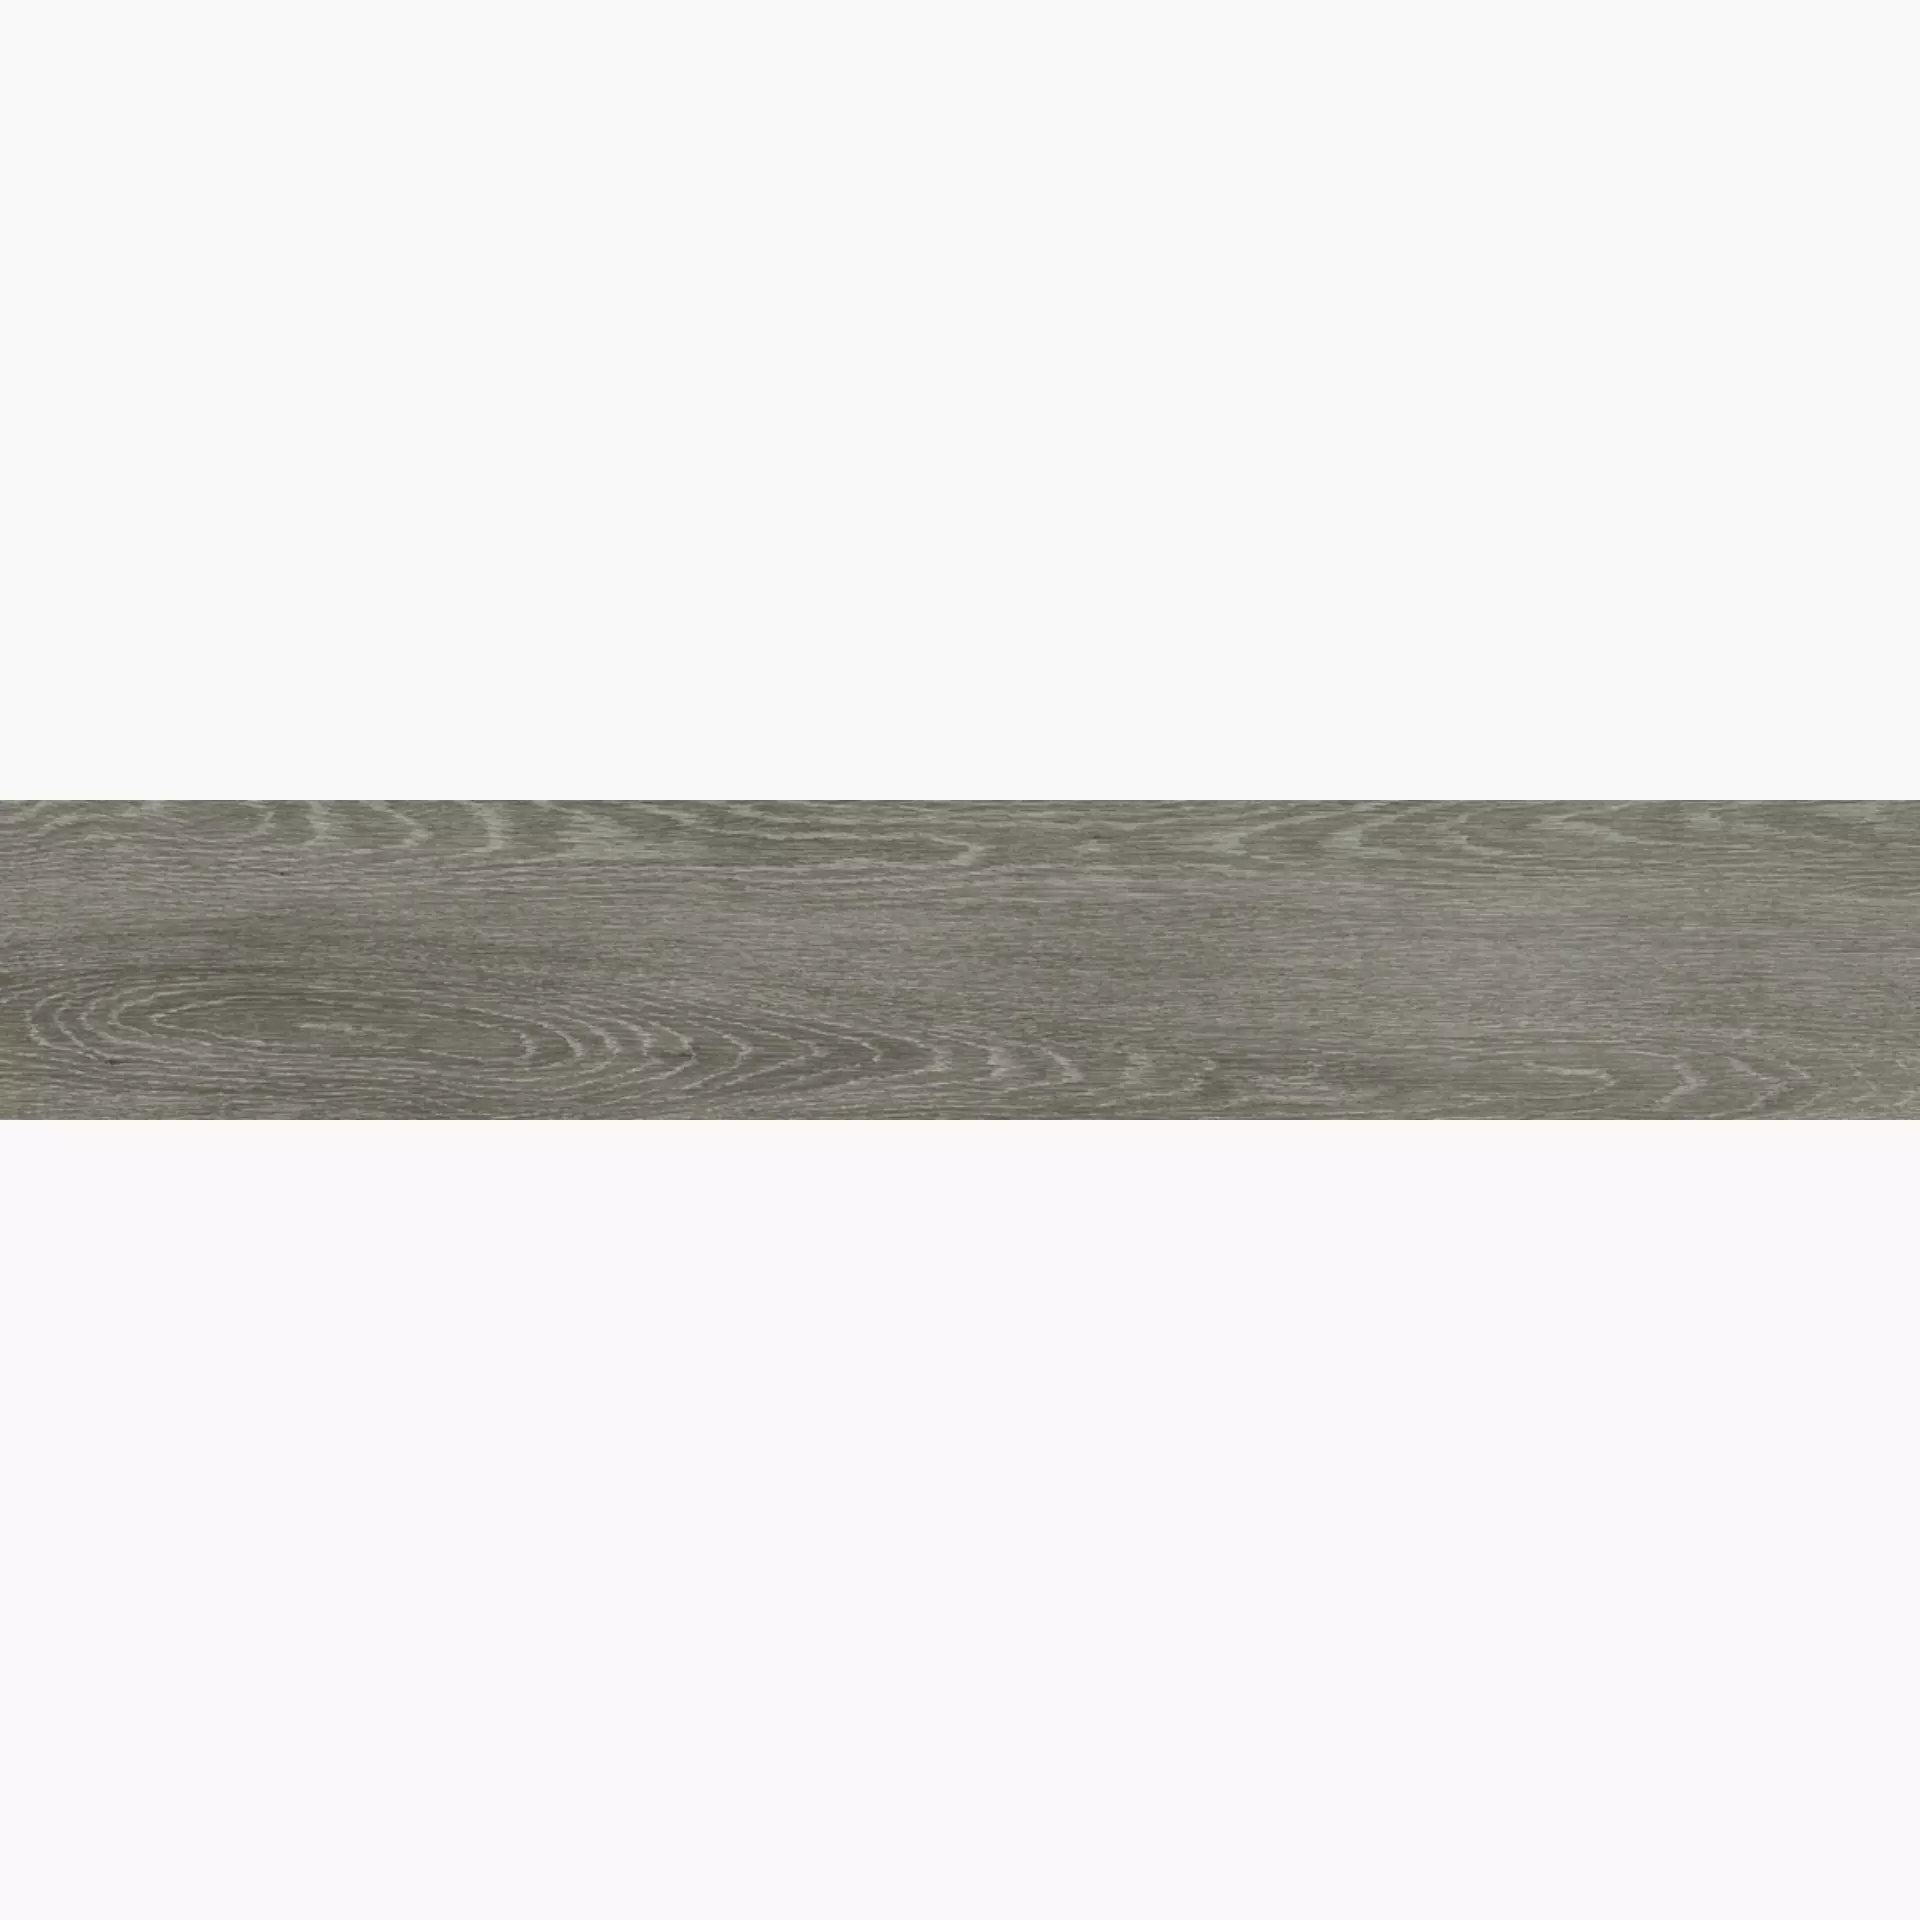 Ergon Tr3Nd Taupe Naturale E419 20x120cm rectified 9,5mm